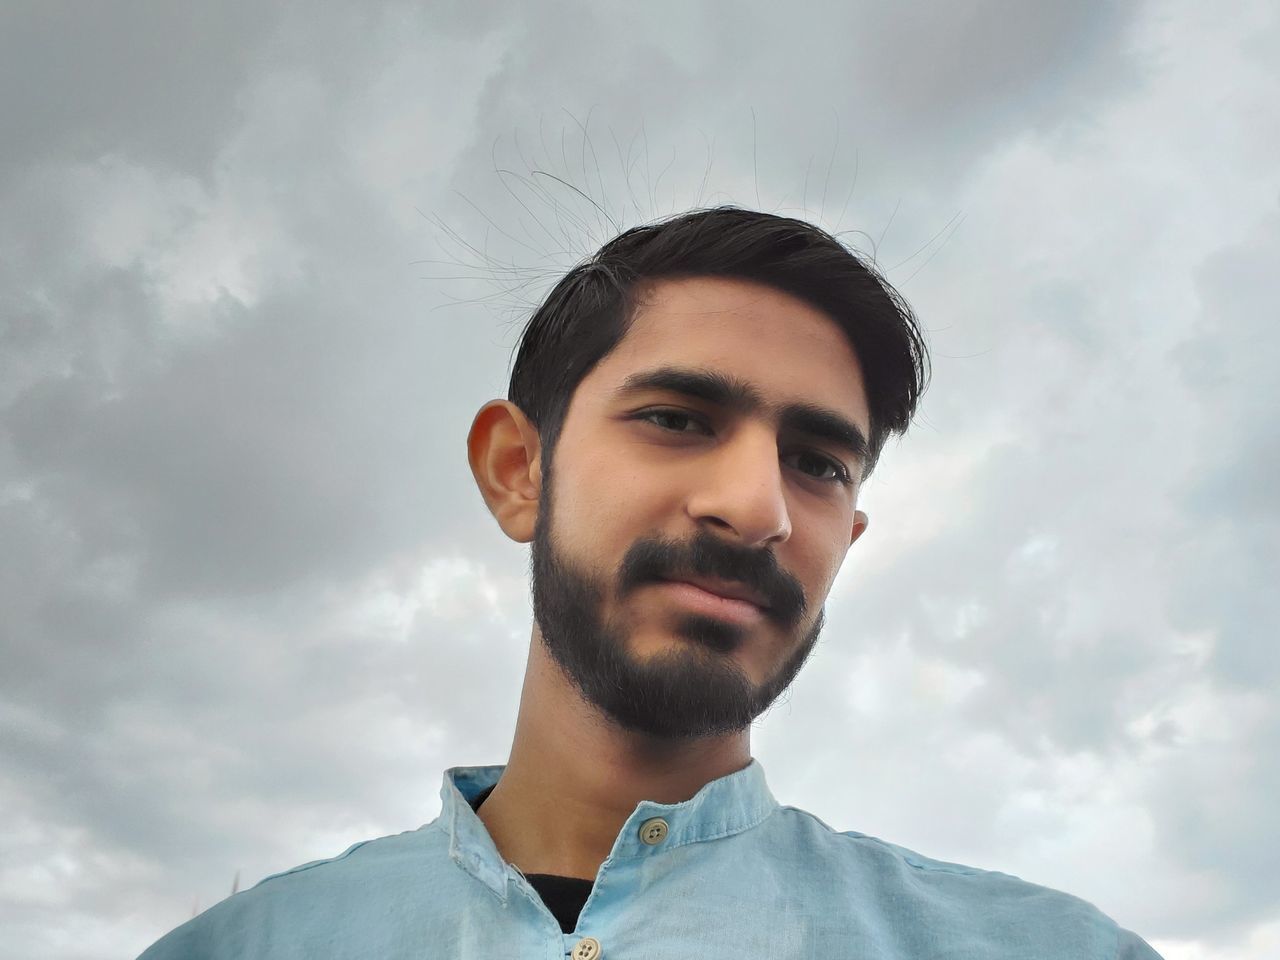 portrait, headshot, cloud - sky, one person, young adult, young men, sky, looking at camera, low angle view, real people, front view, beard, facial hair, lifestyles, nature, leisure activity, casual clothing, men, day, human face